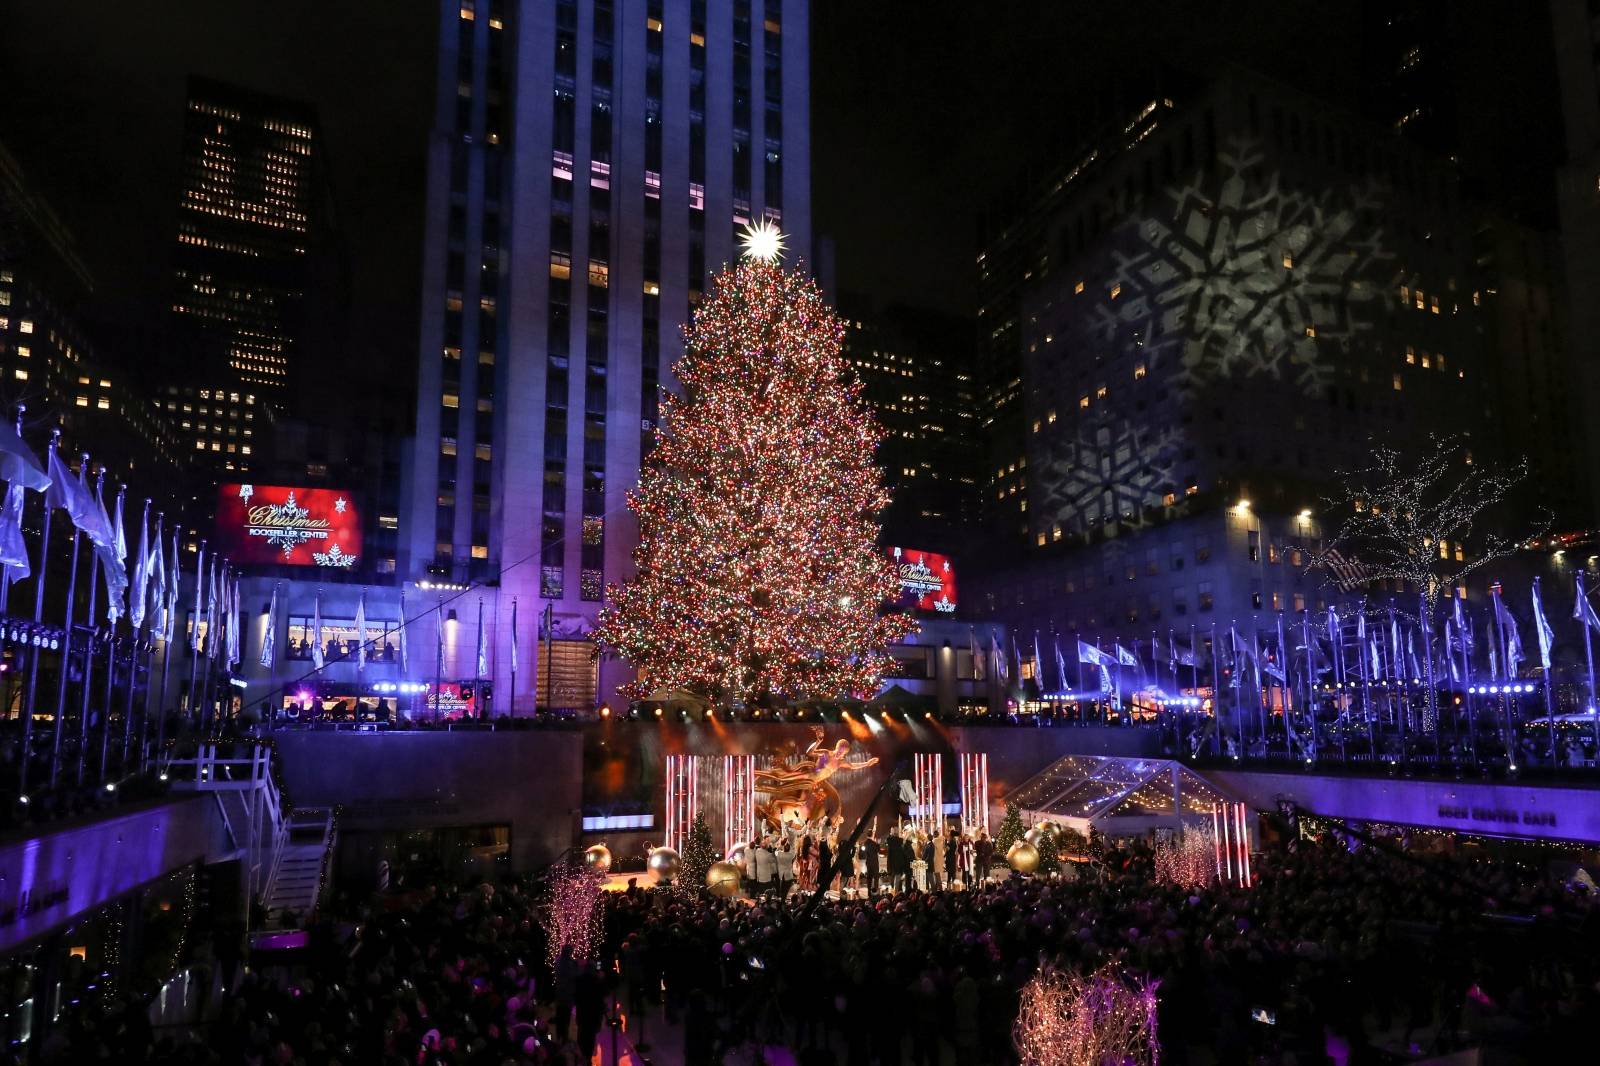 People watch the lighting of The Rockefeller Center Christmas Tree in New York City